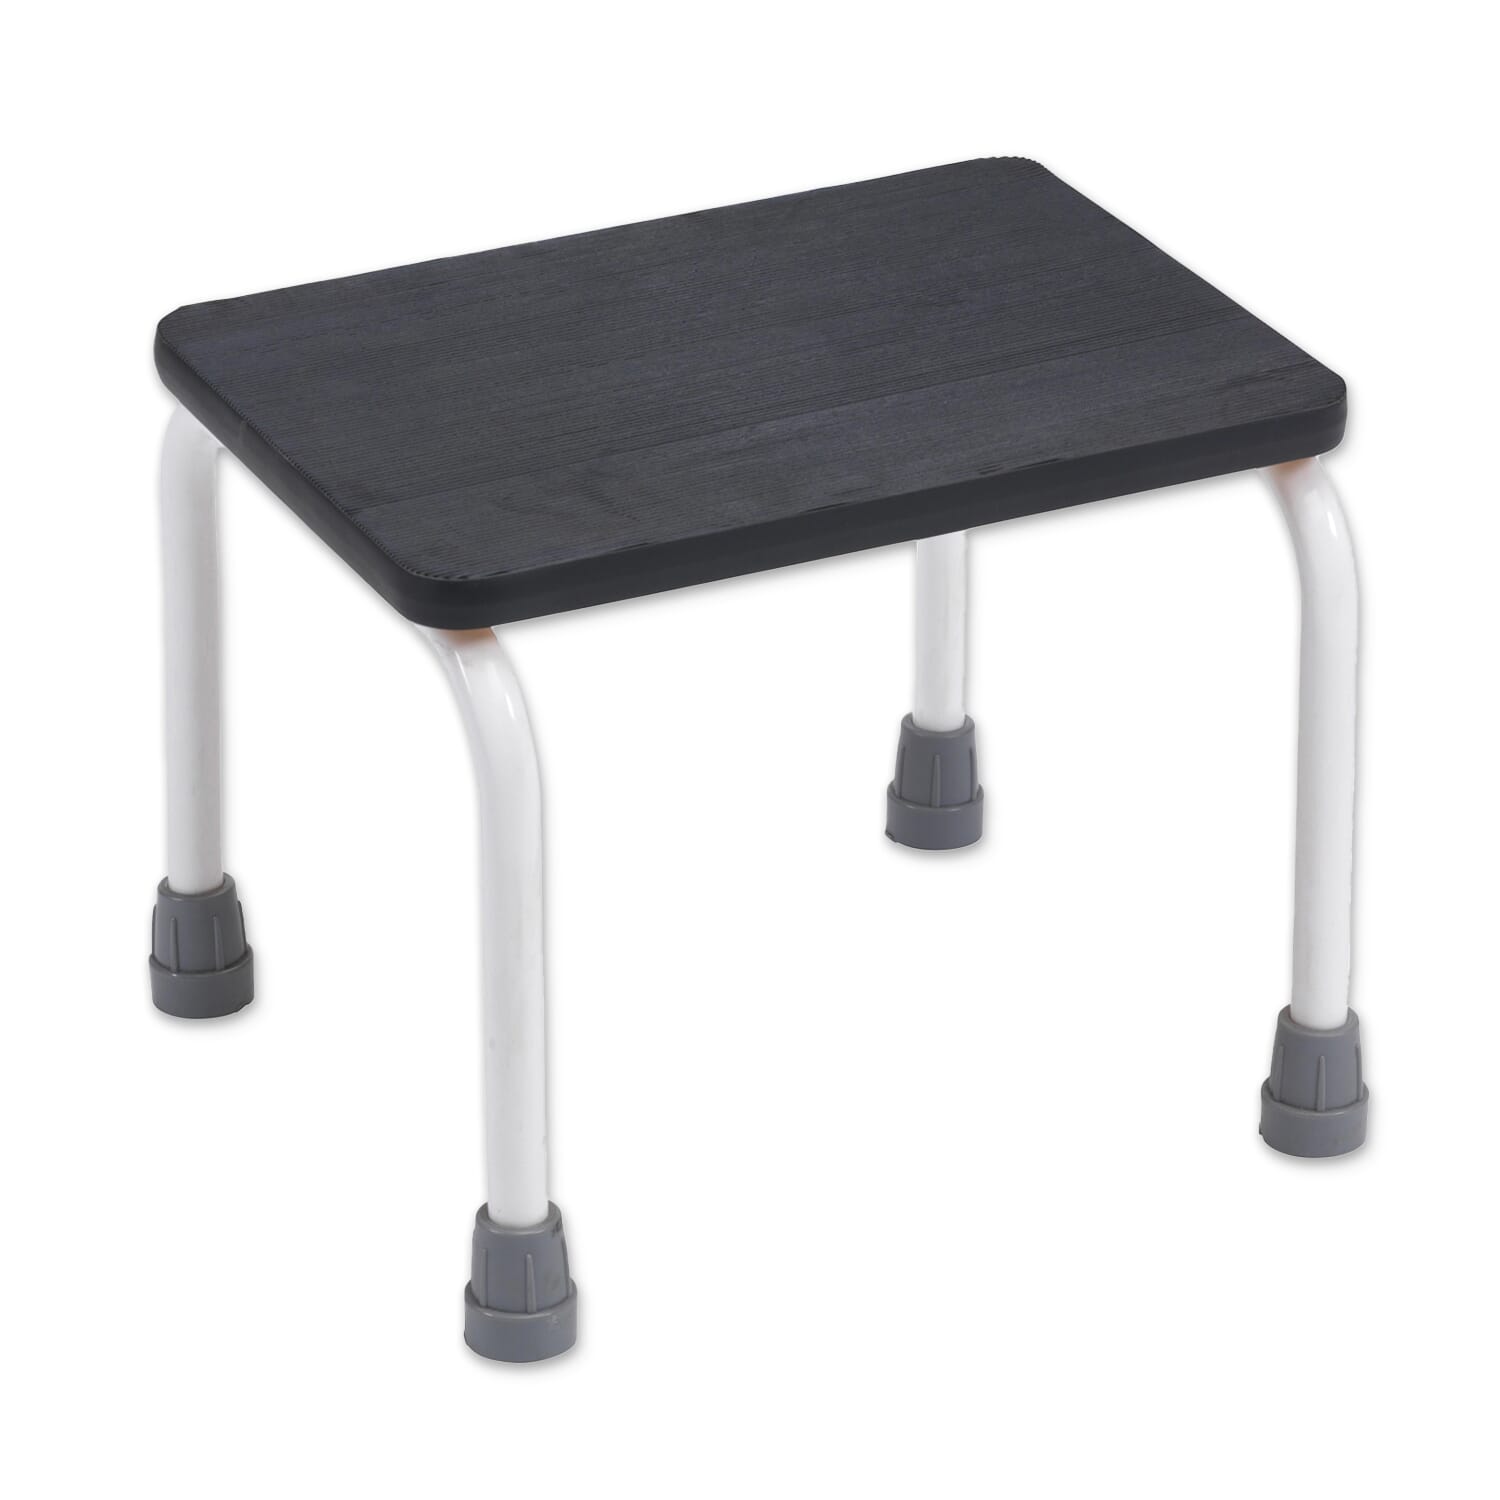 View Bath Step Stool 230mm 9 inch Height information